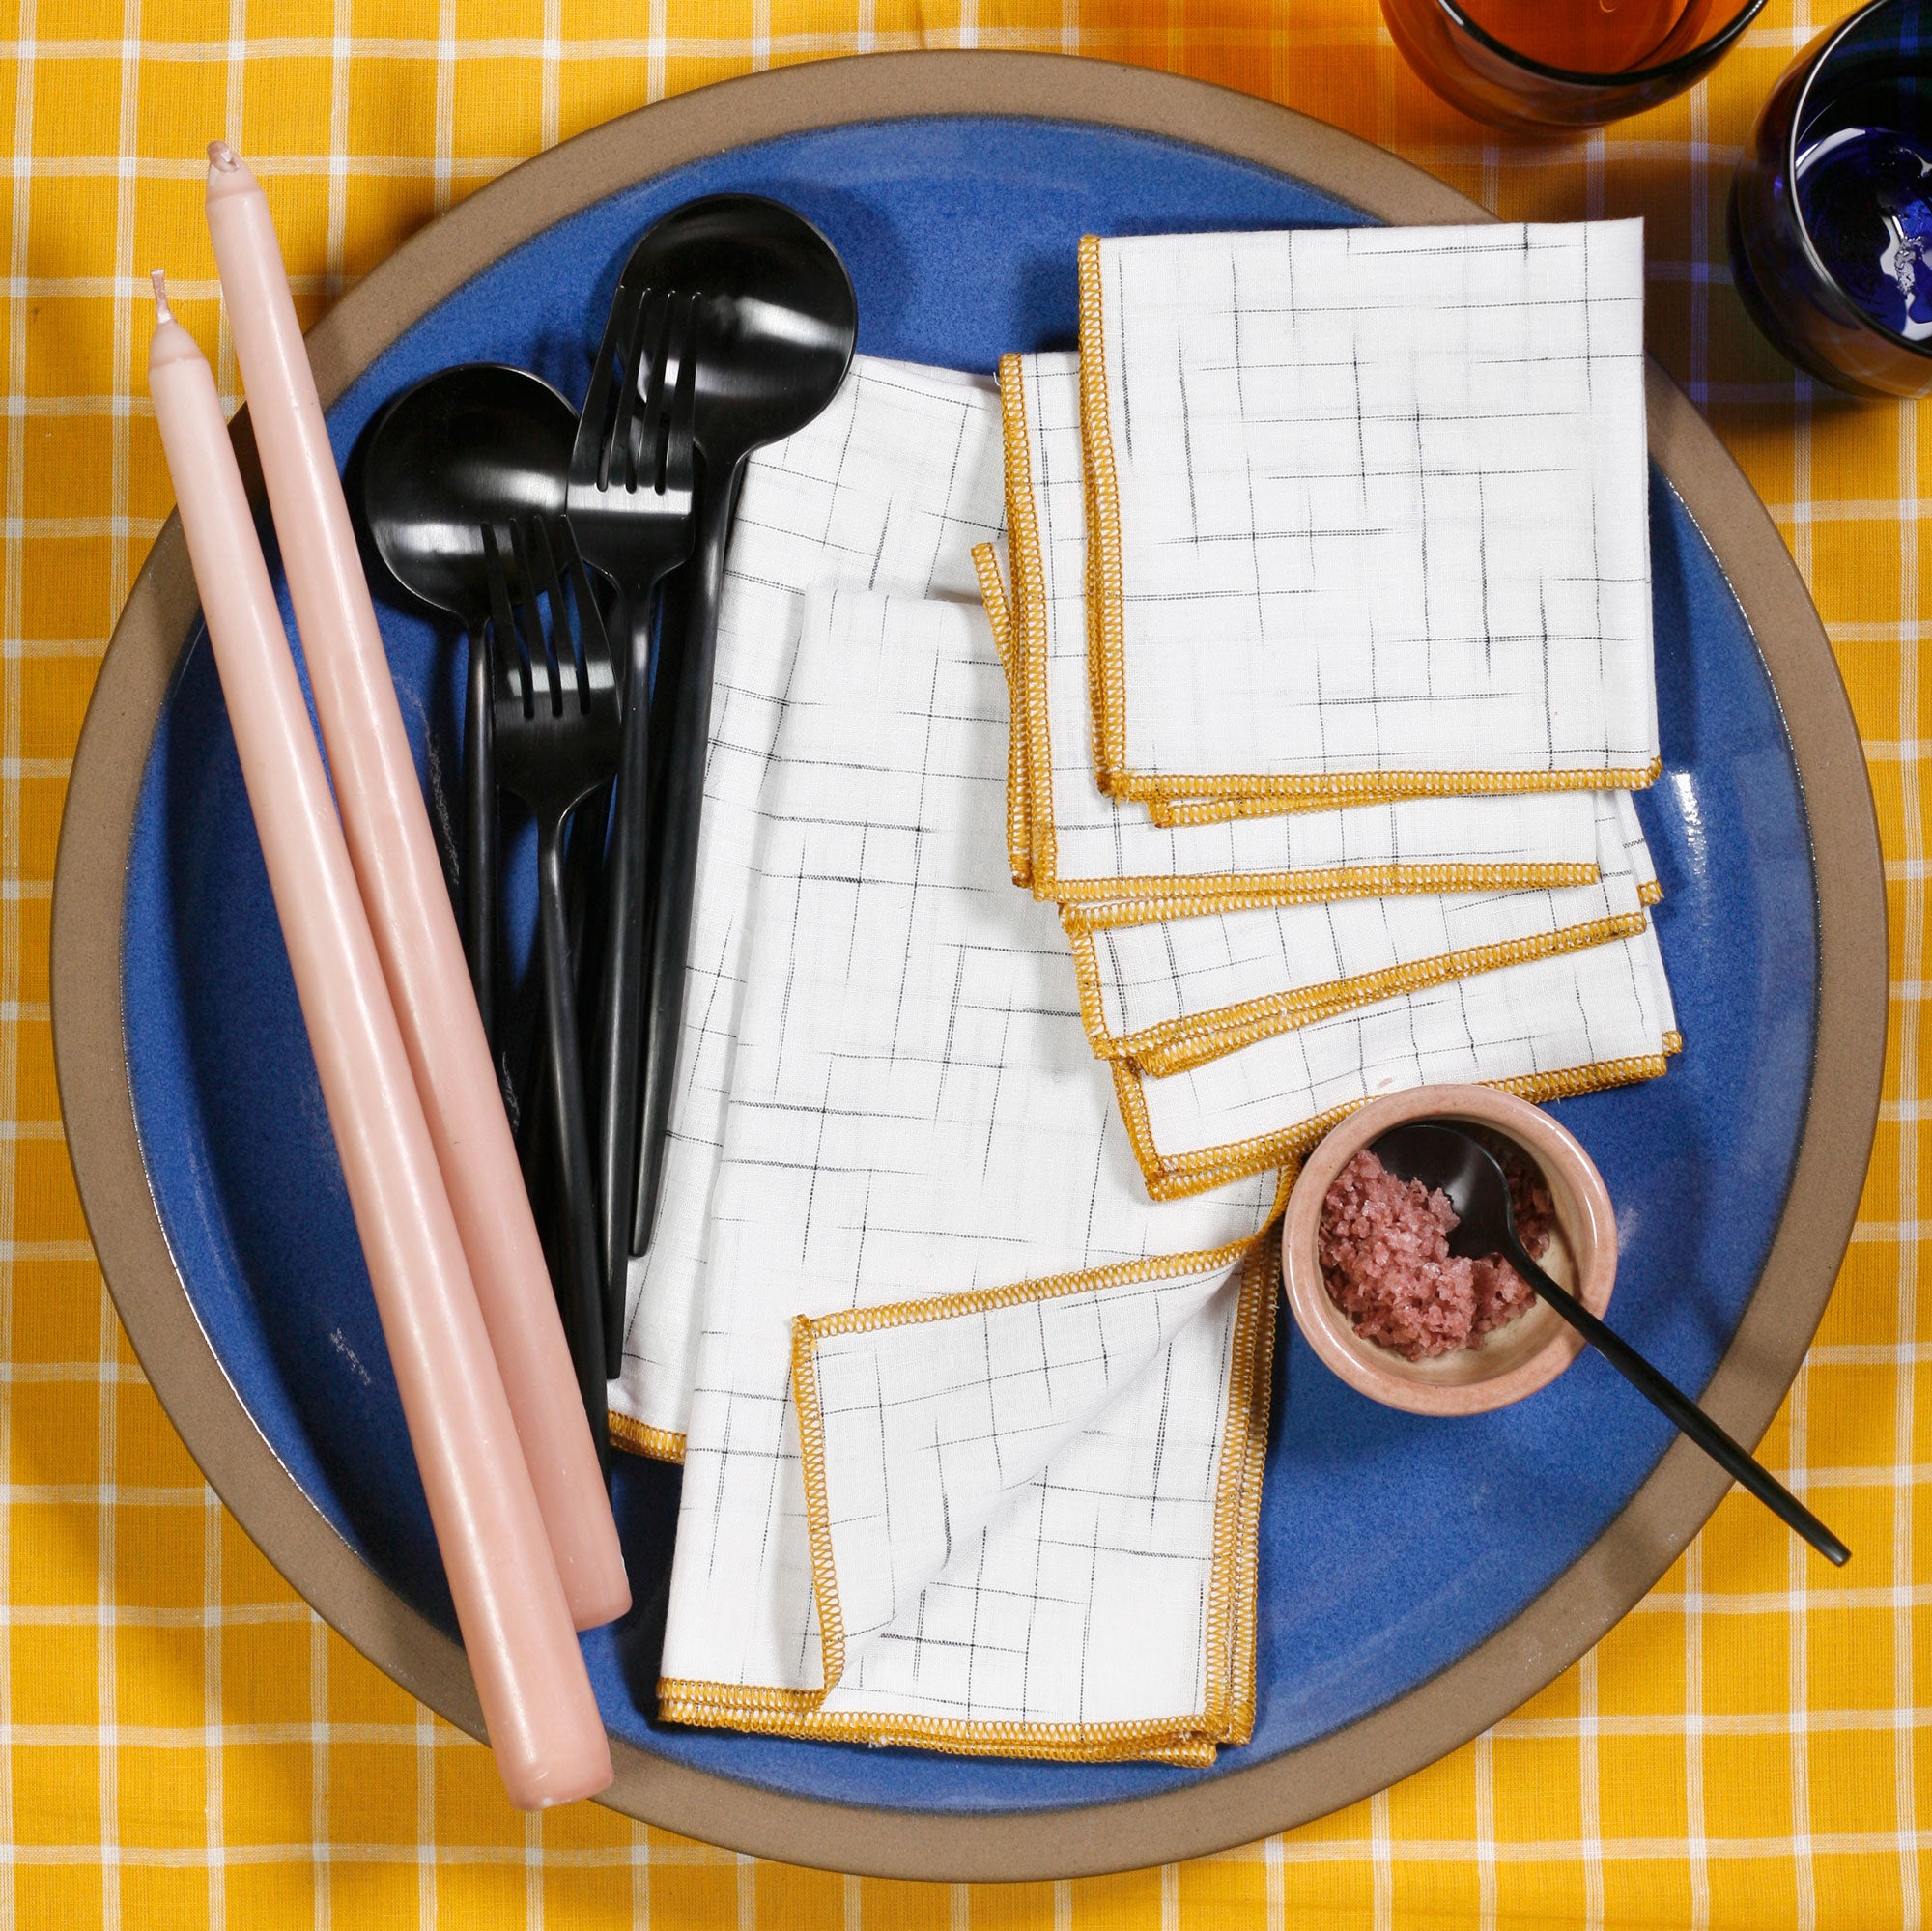 Summer School White and Gold Grid Cocktail Napkins, Set of 4